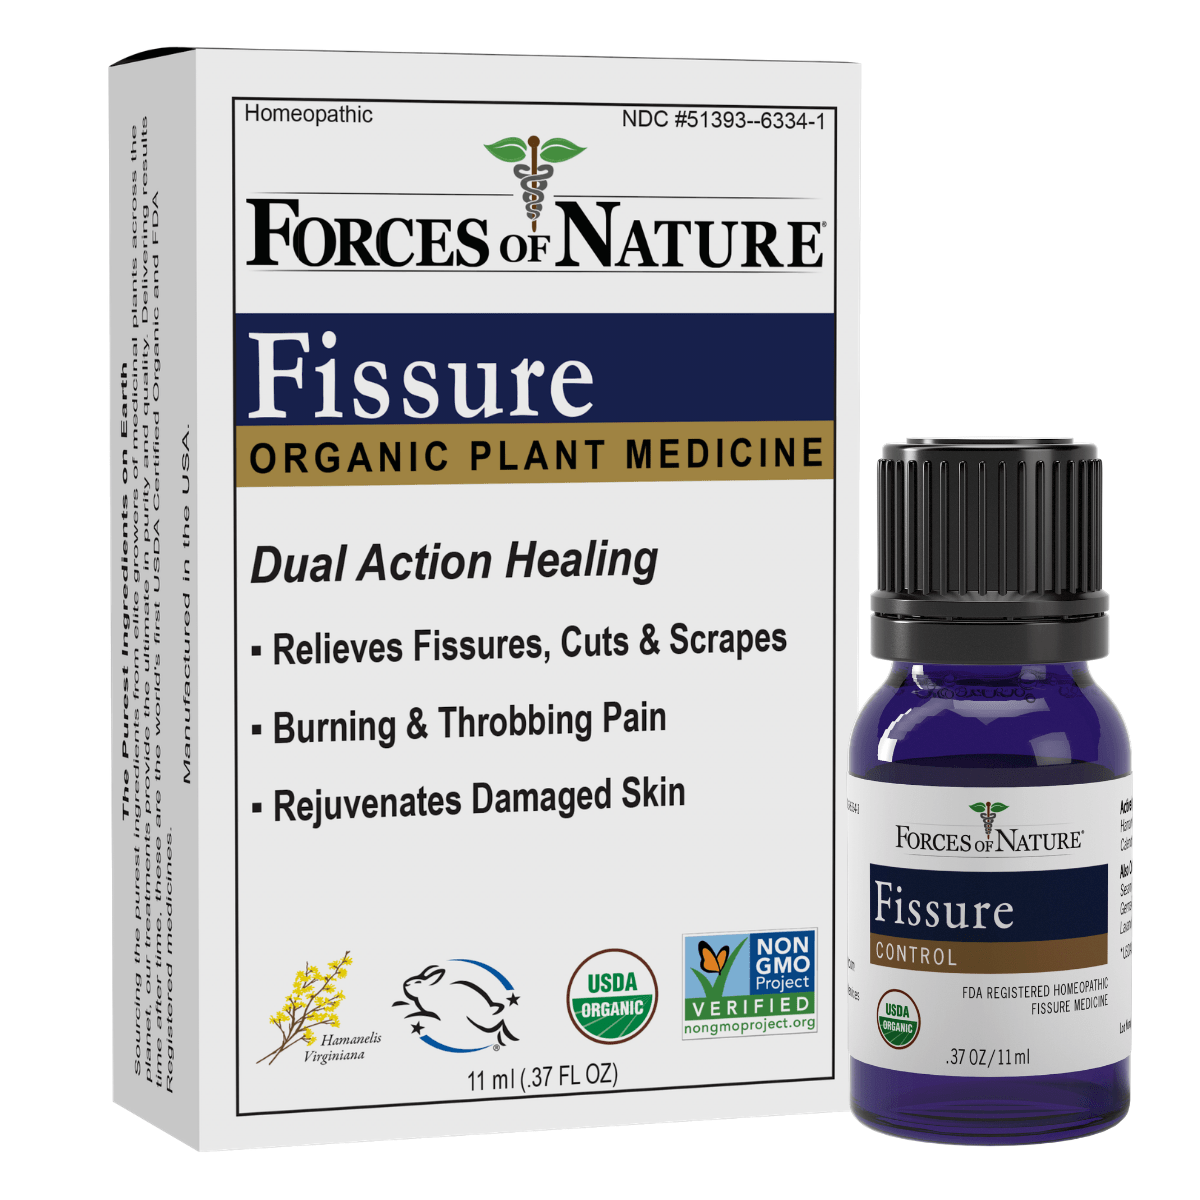 Fissure Control - Natural Anal Fissure Relief - Forces of Nature Medicine